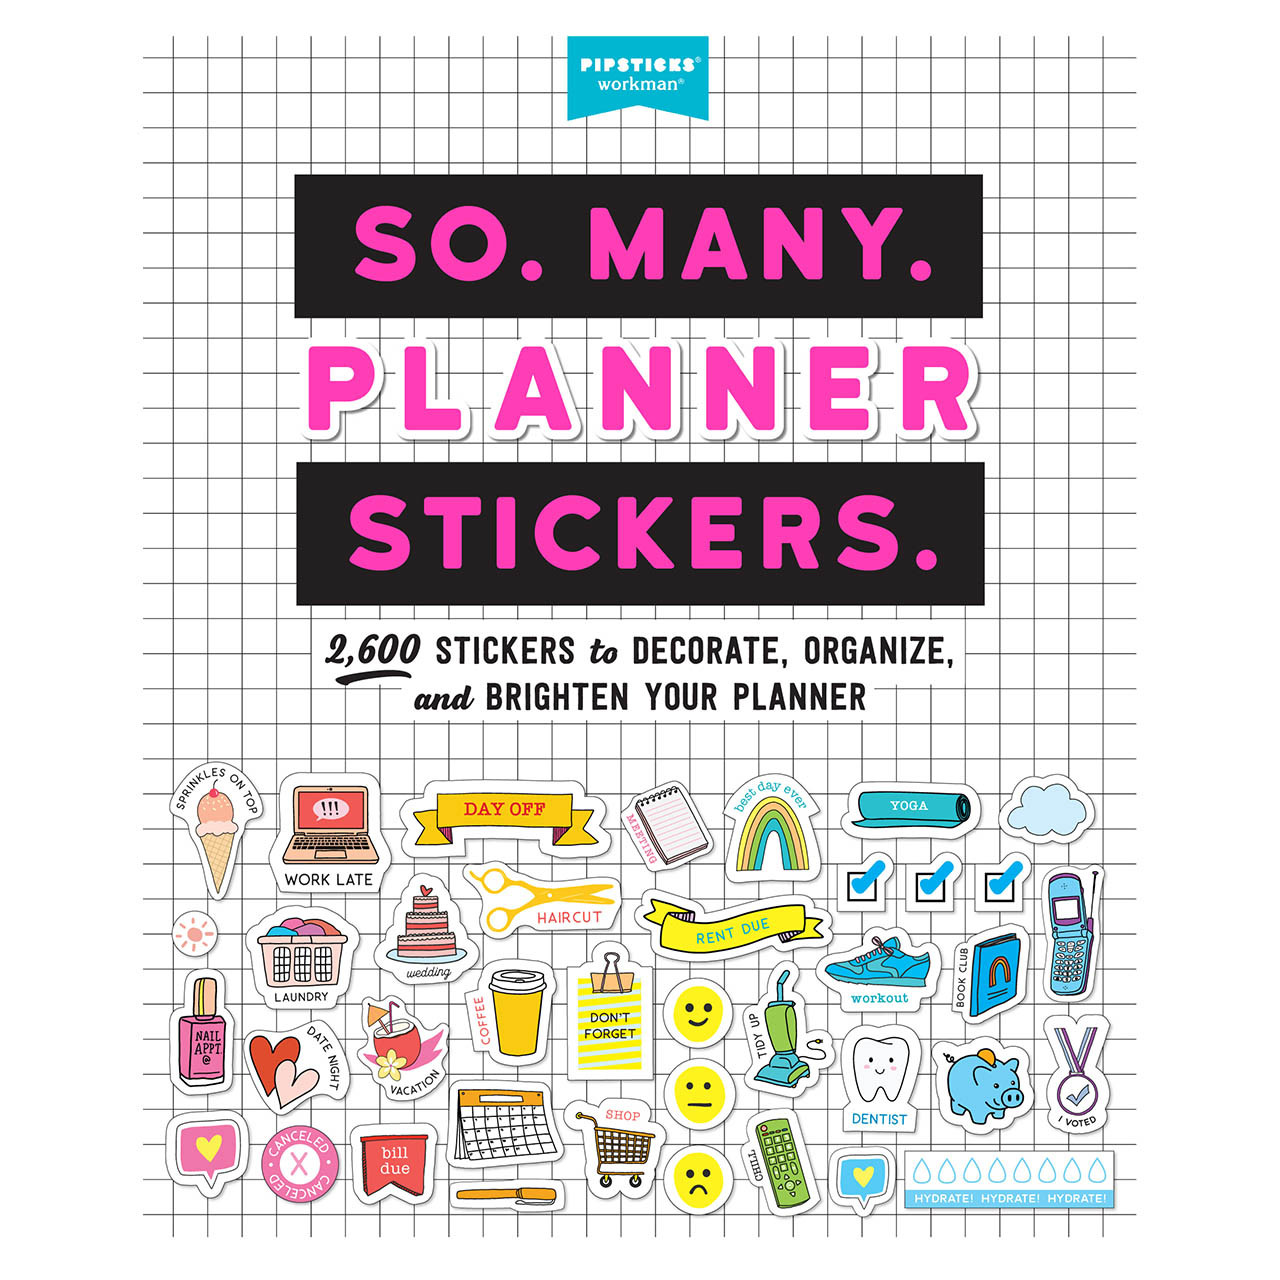 So. Many. Planner Stickers. - Franklin Planner